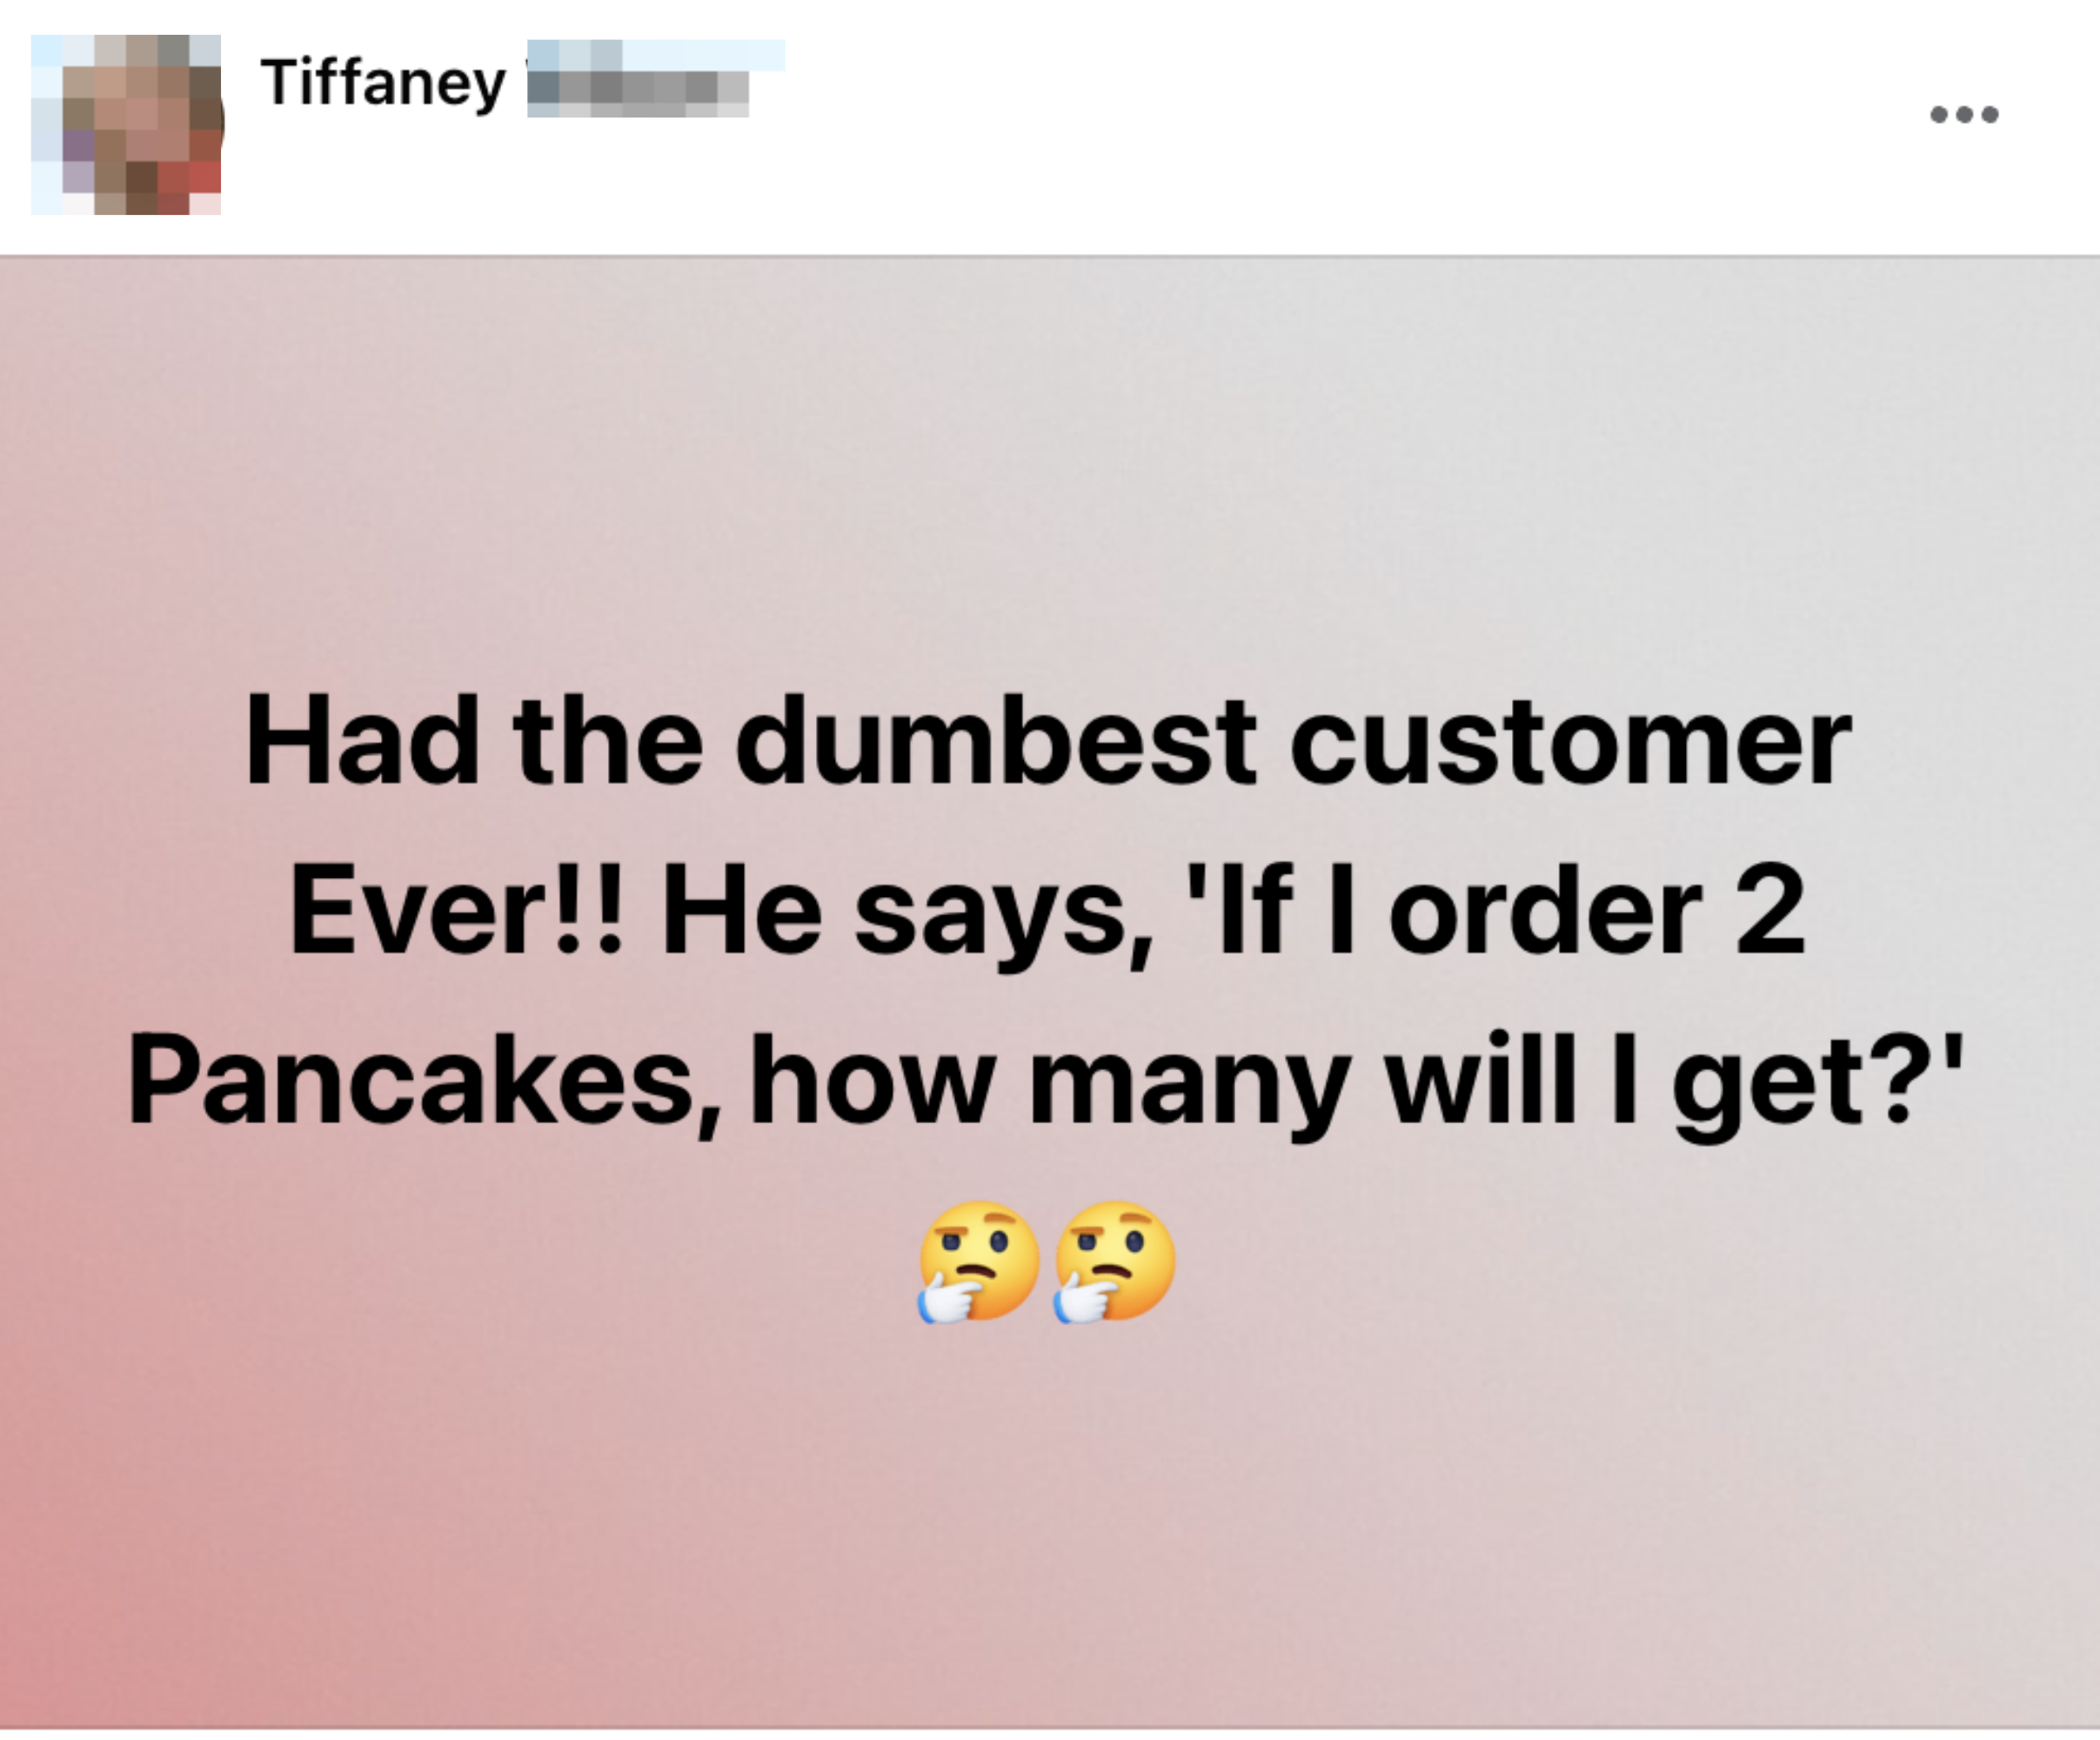 Social media post sharing a customer service experience with text: &quot;Had the dumbest customer Ever!! He says, &#x27;If I order 2 Pancakes, how many will I get?&#x27;&quot; Expressive emojis included